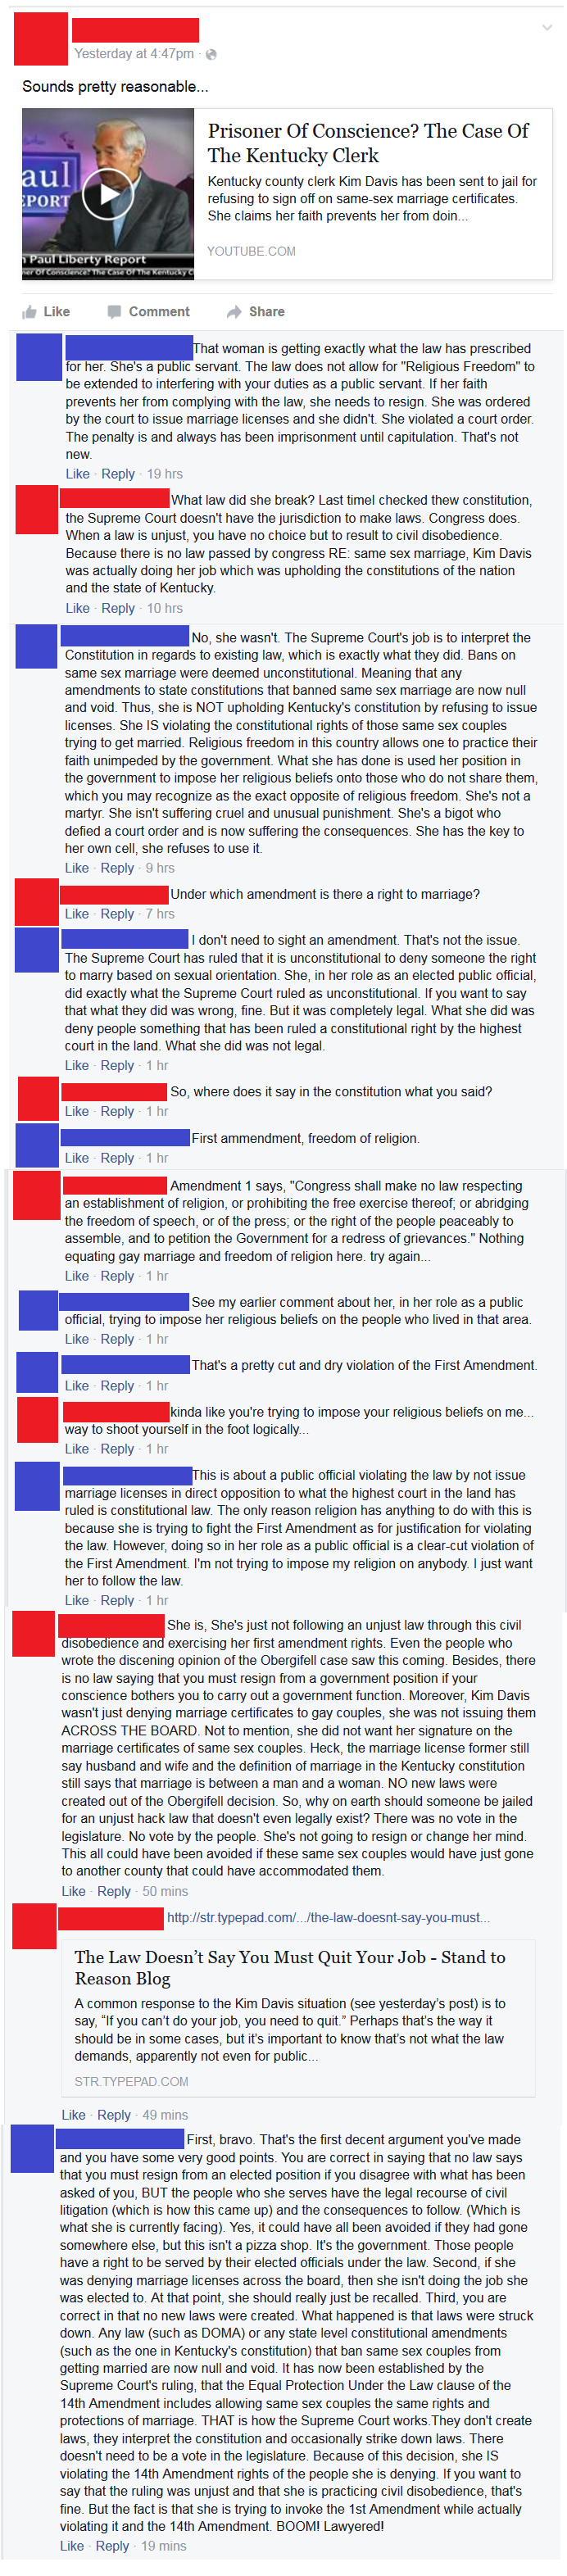 Bigot on Facebook trying to defend that sister wife reject, Kim Davis.